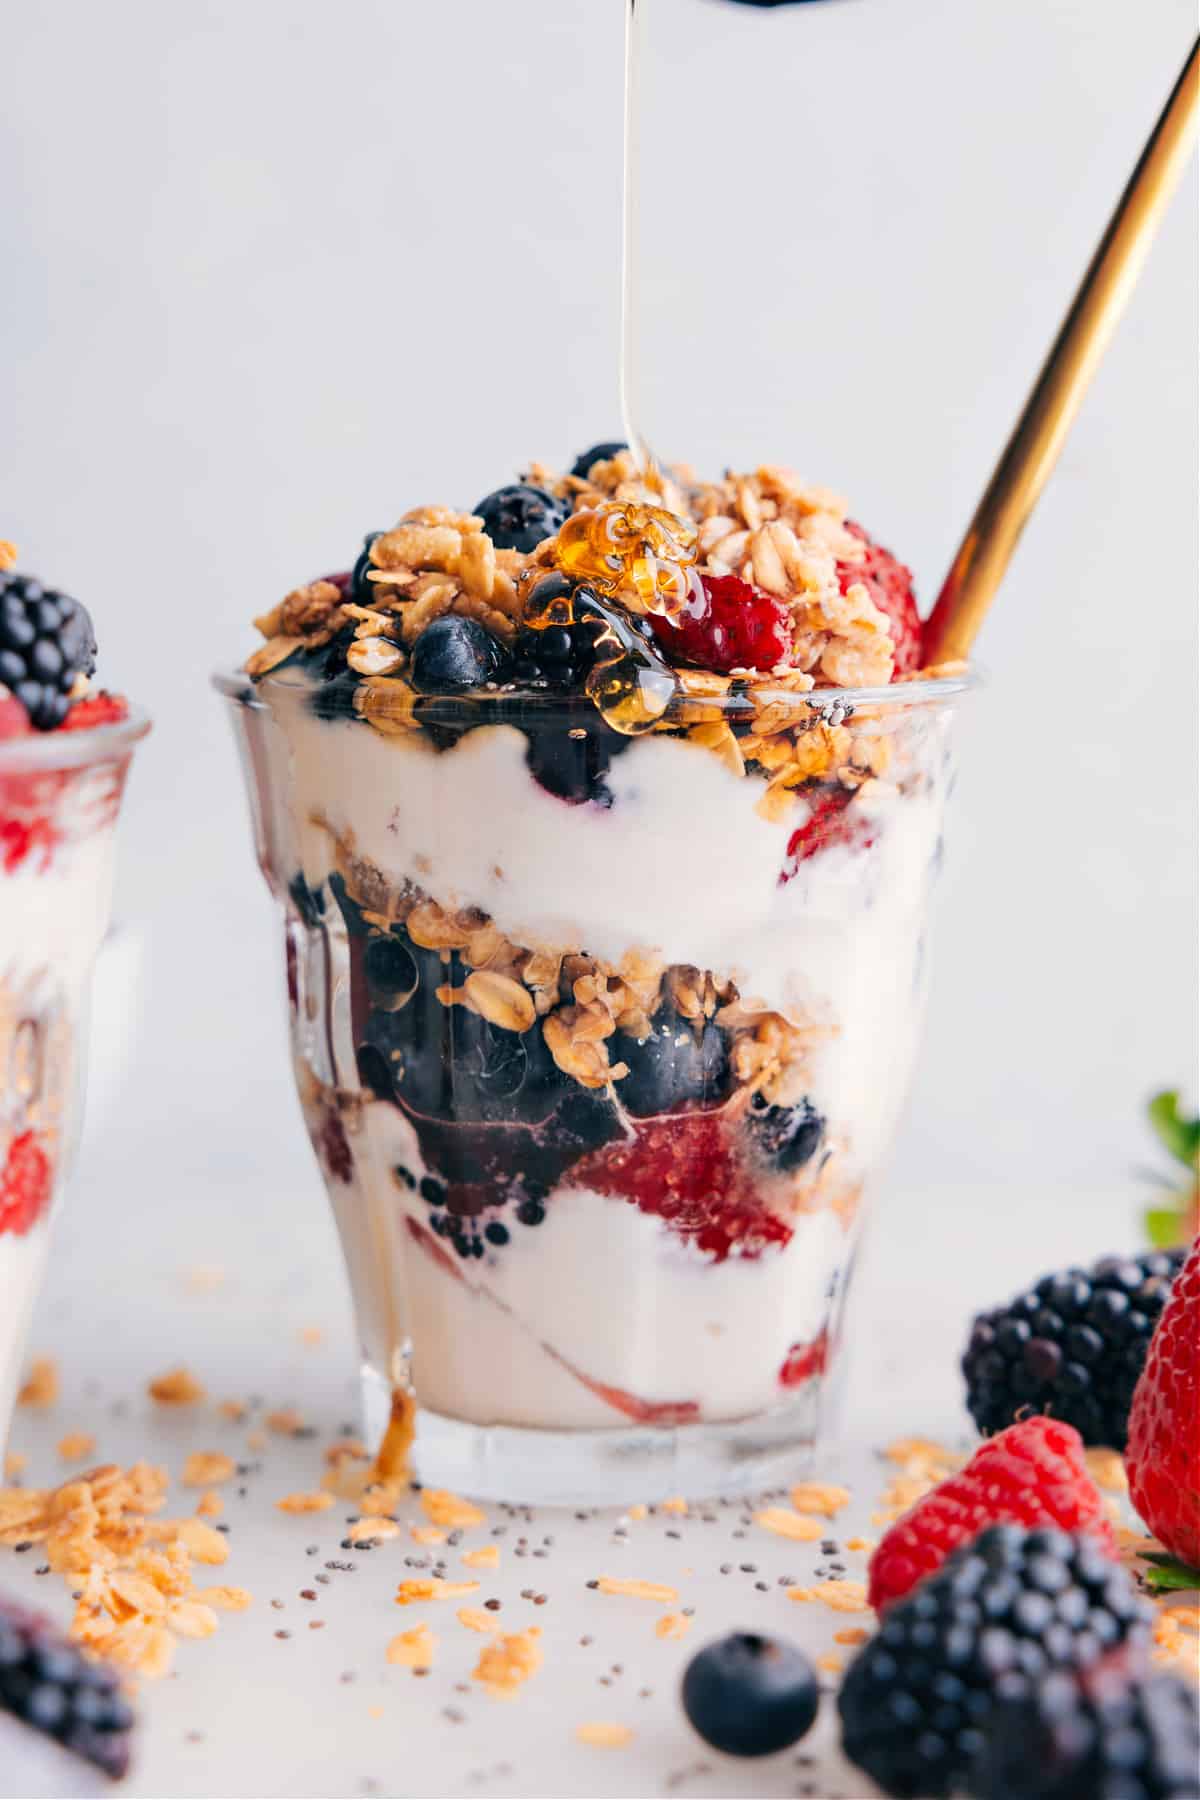 Yogurt parfait with a drizzle of honey being drizzled over it.